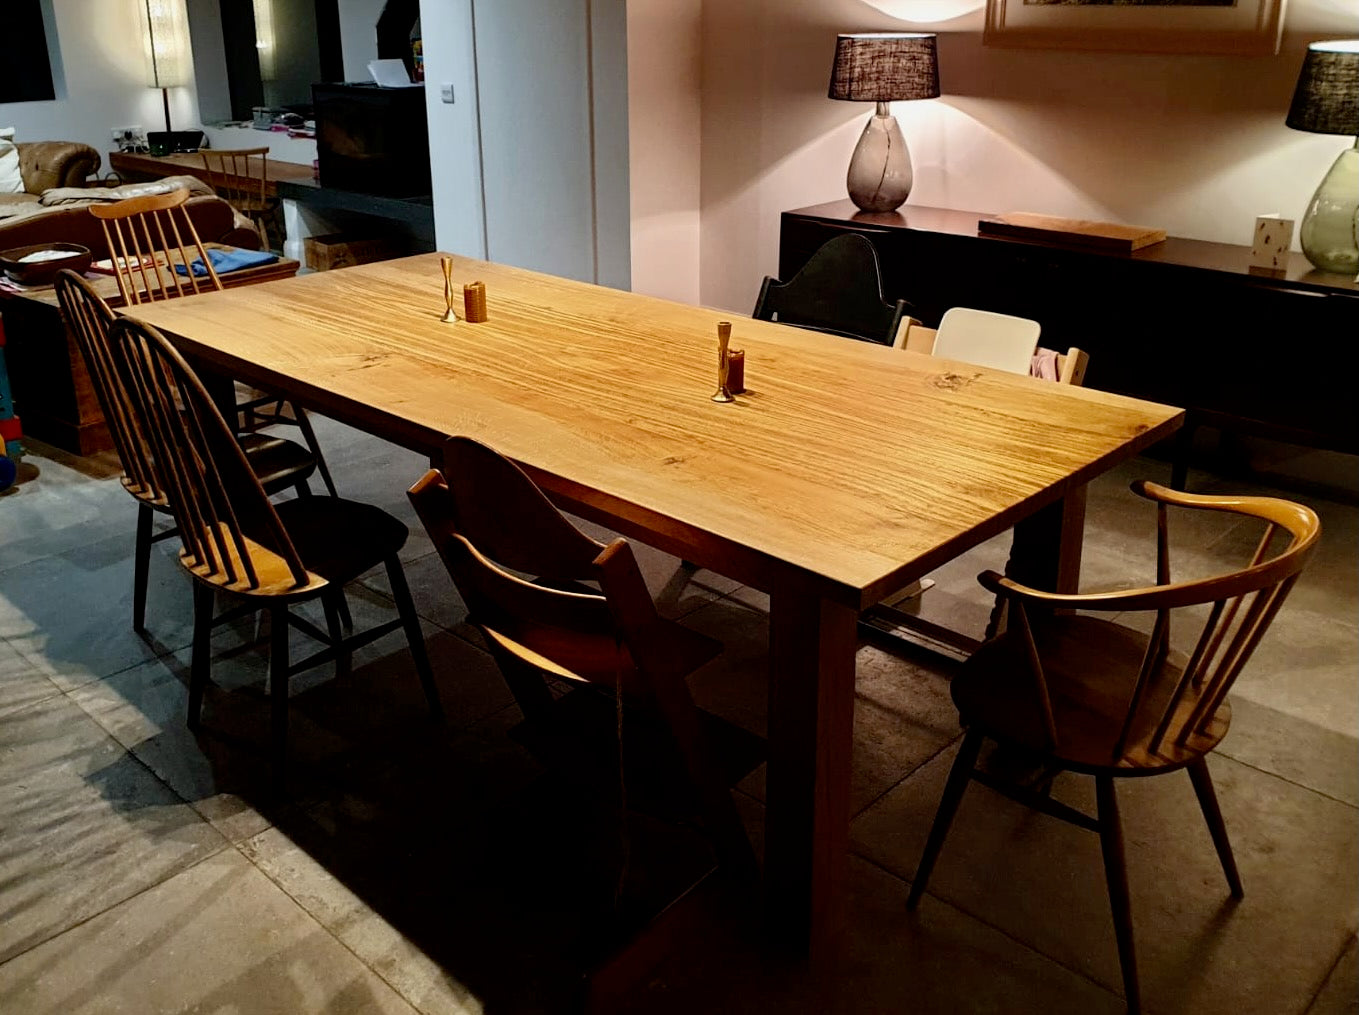 Bespoke farmhouse dining table made from locally sourced oak